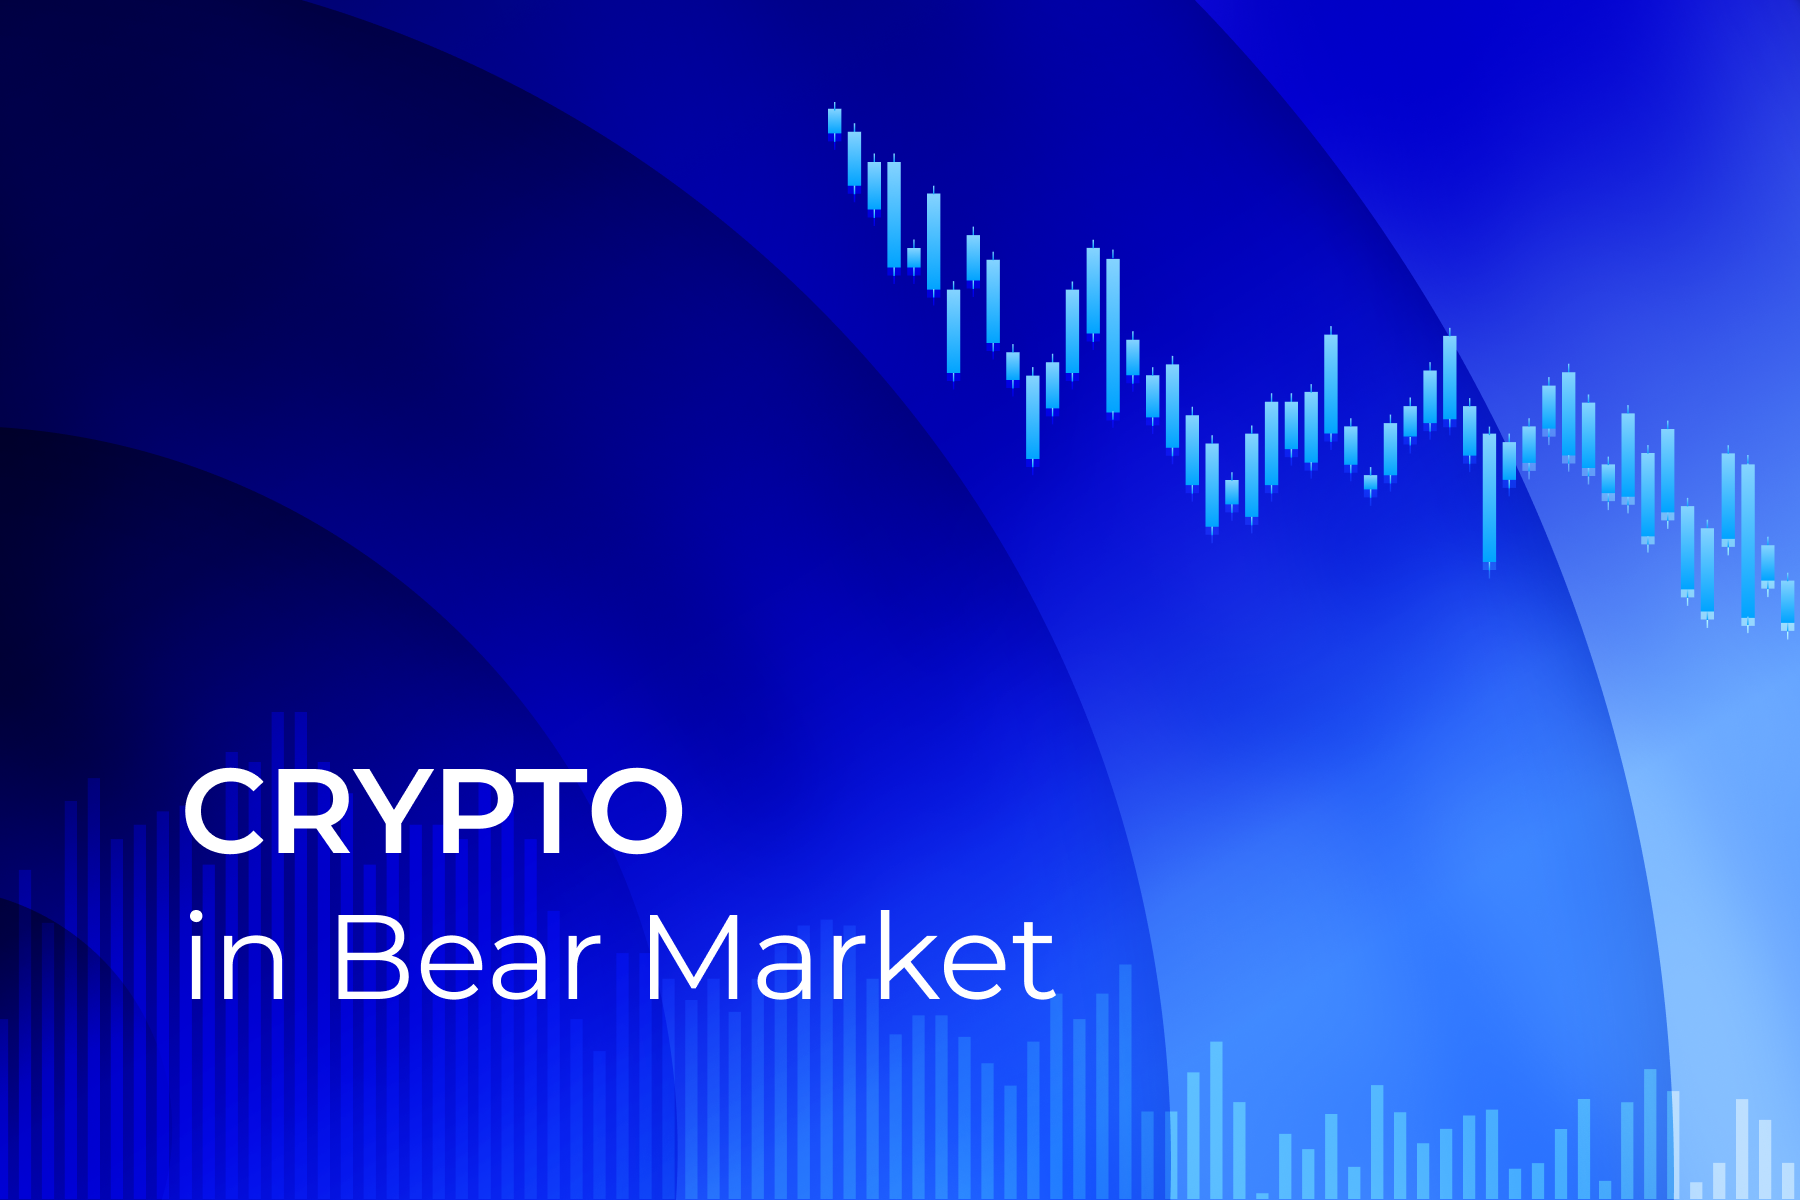 How to Invest In Crypto During a Bear Market